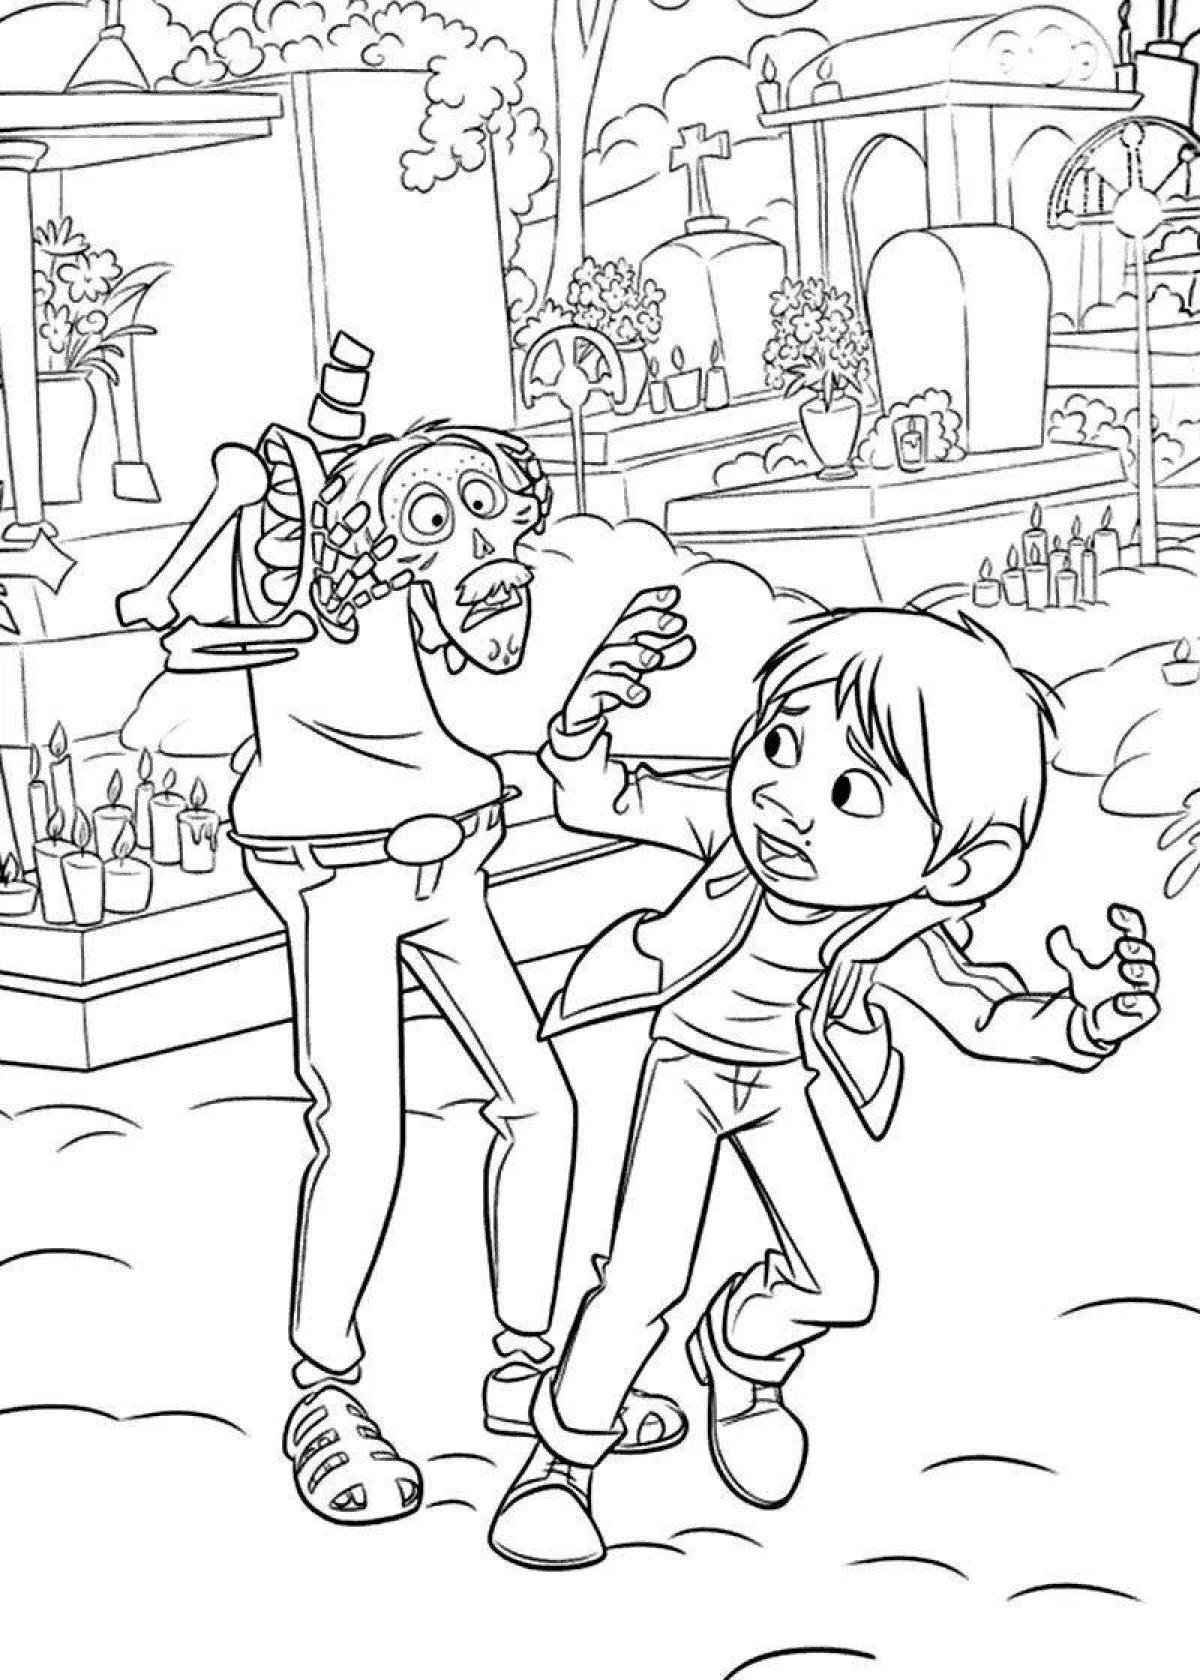 Coco's playful coloring page